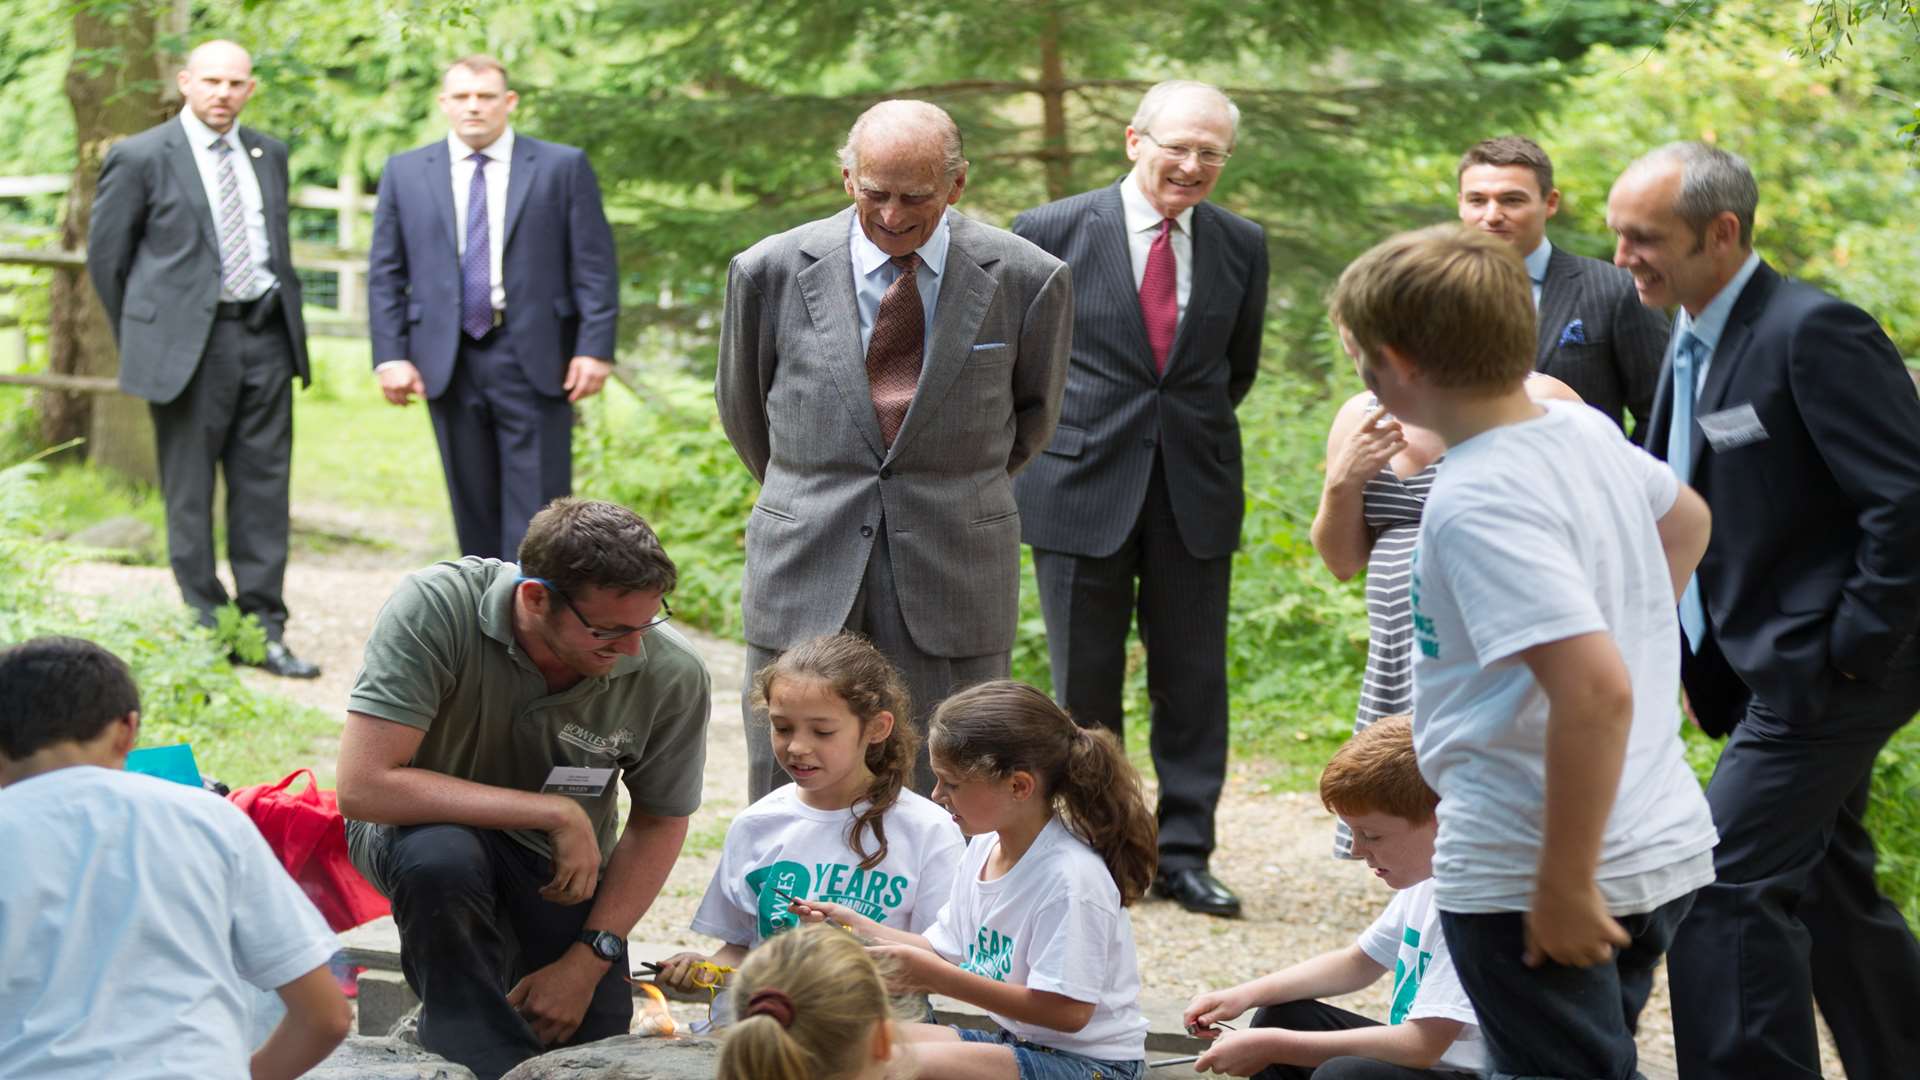 Prince Phillip was invited to join celebrations at Bowles for its 50th birthday